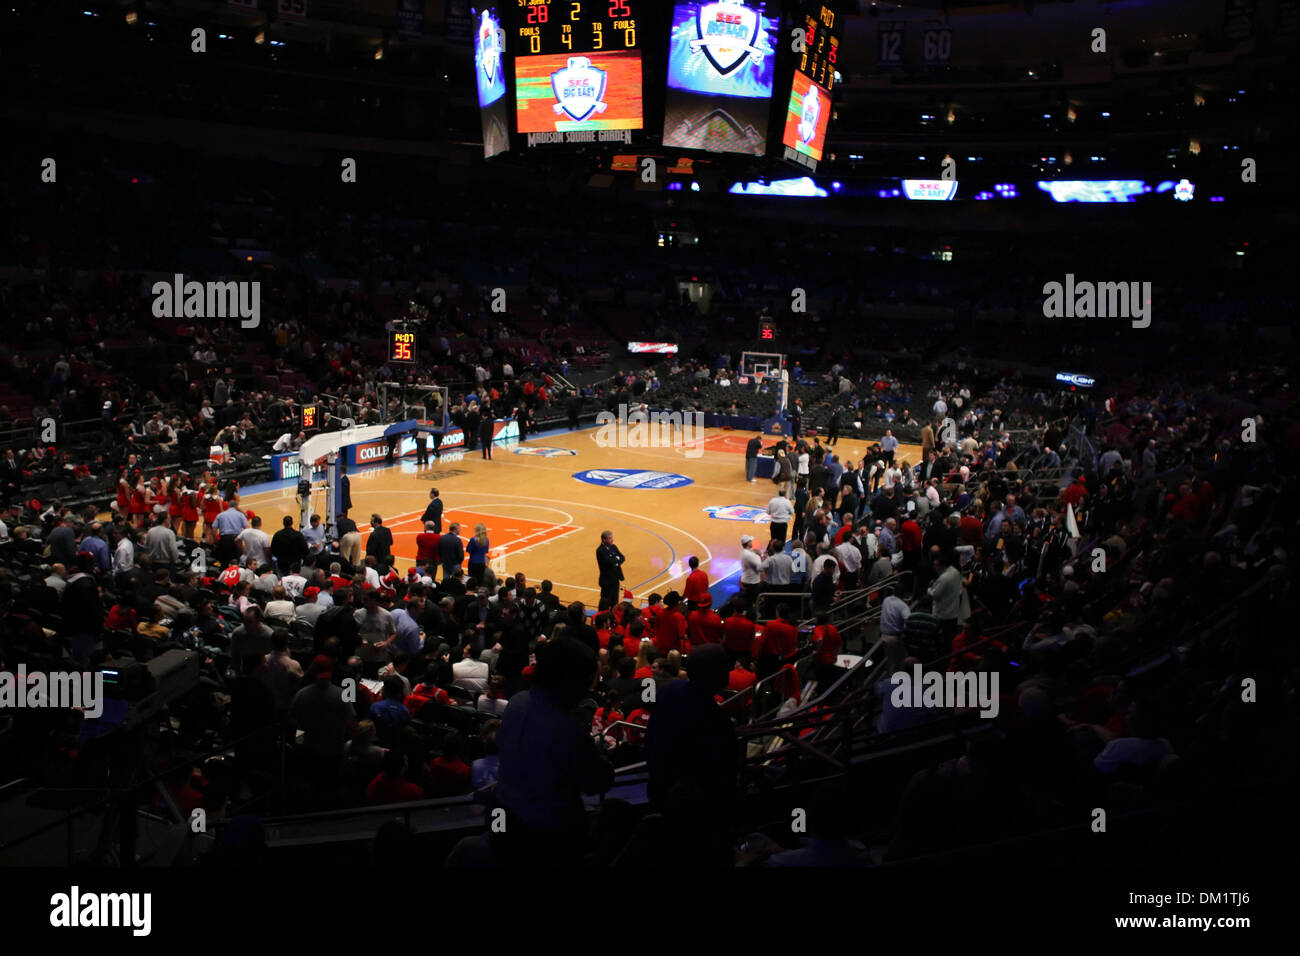 Madison Square Garden St Johns Defeated Georgia 66 56 At The